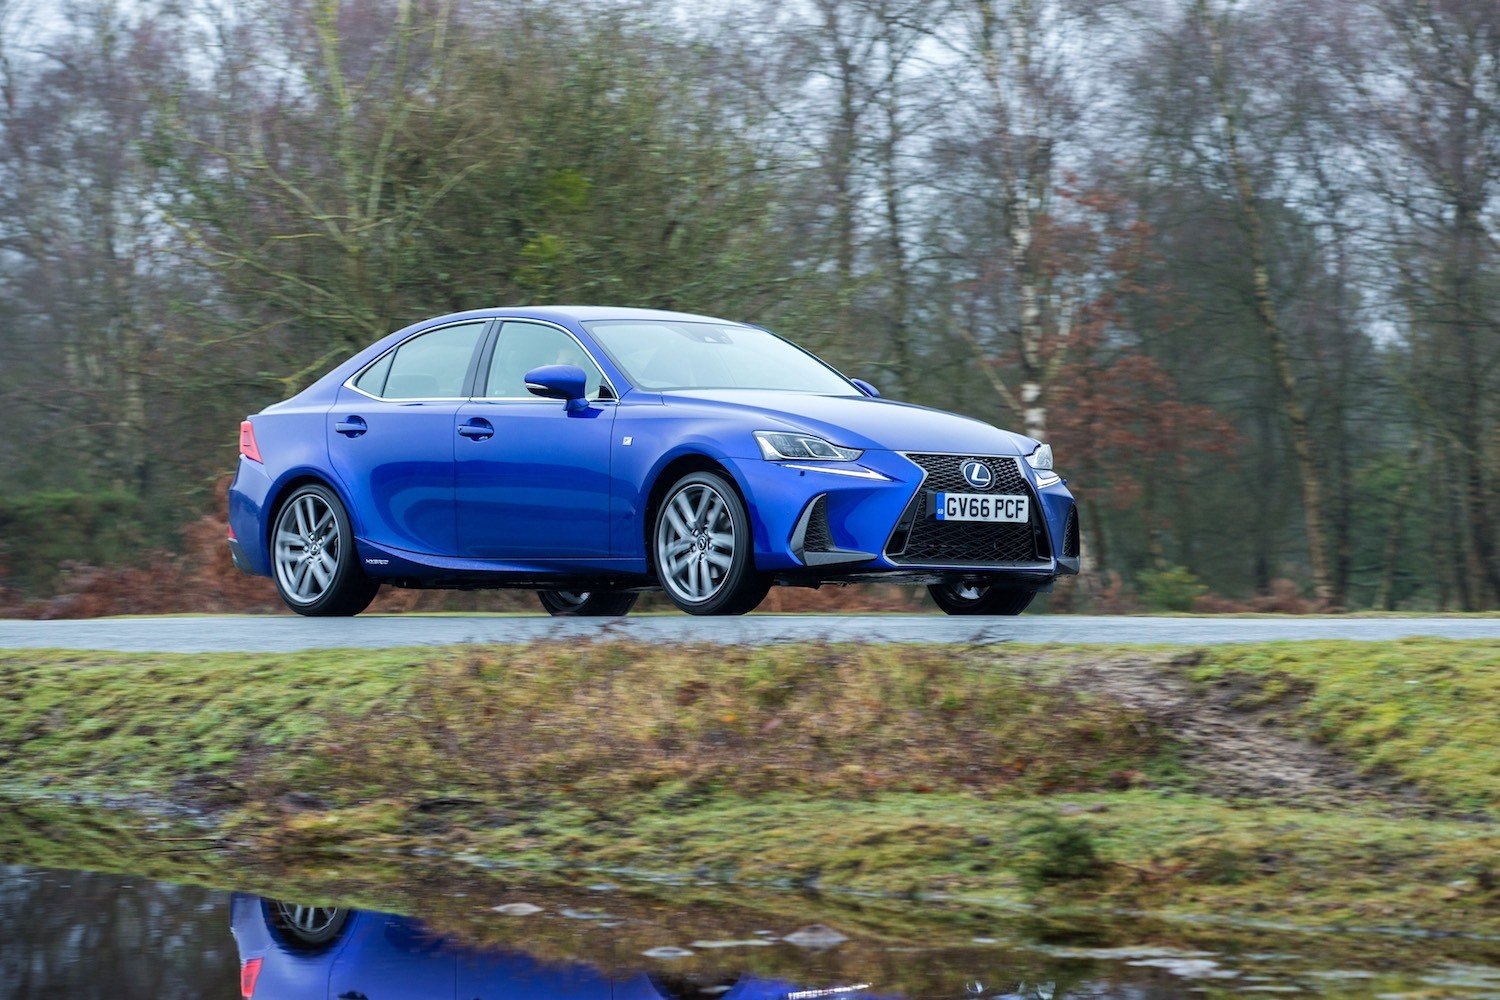 Neil Lyndon reviews the Lexus IS300h for Drive 2